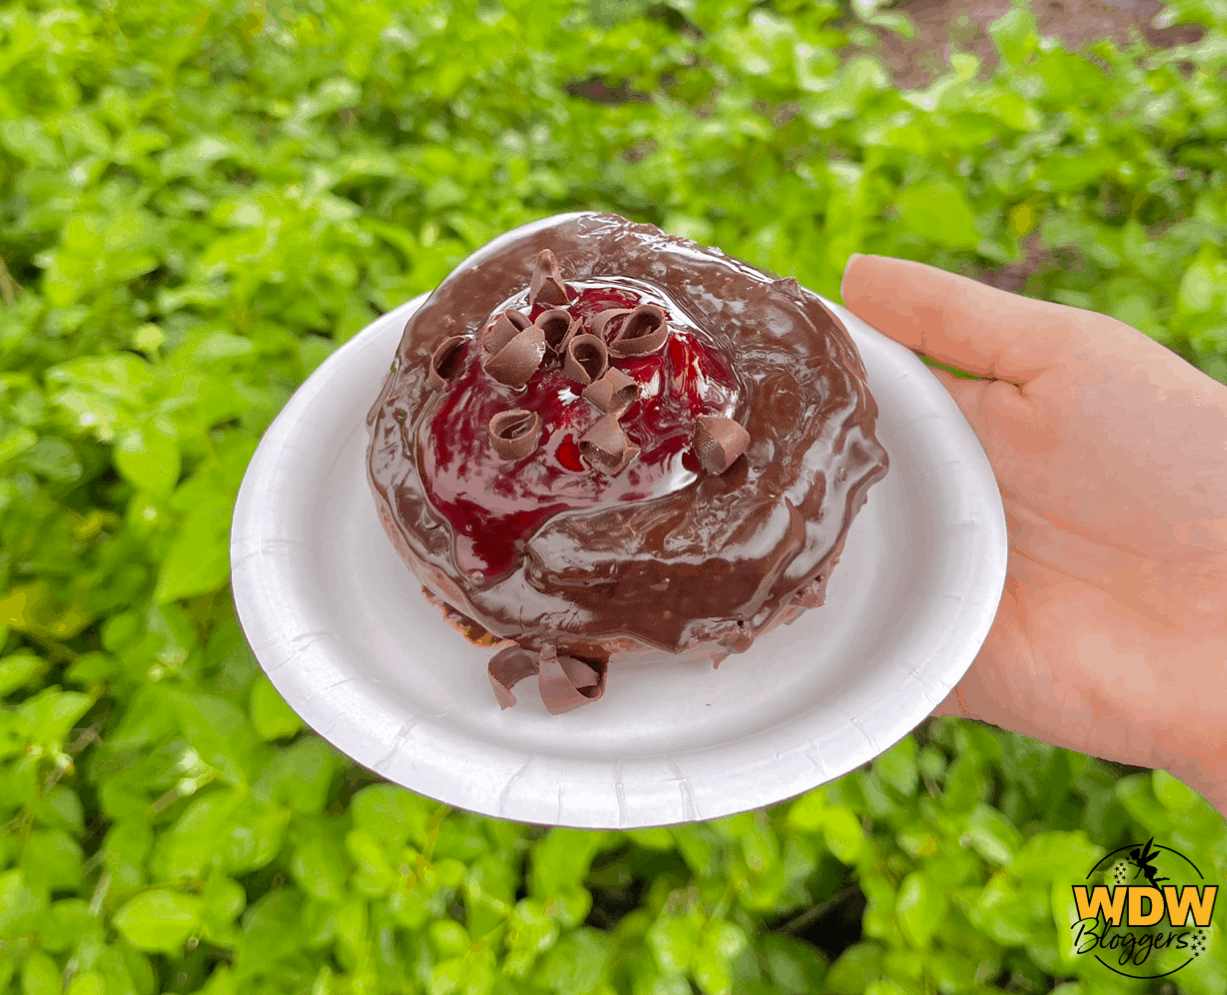 The-Donut-Box-Black-Forest-Donut-at-Epcot-Food-and-Wine-Festival